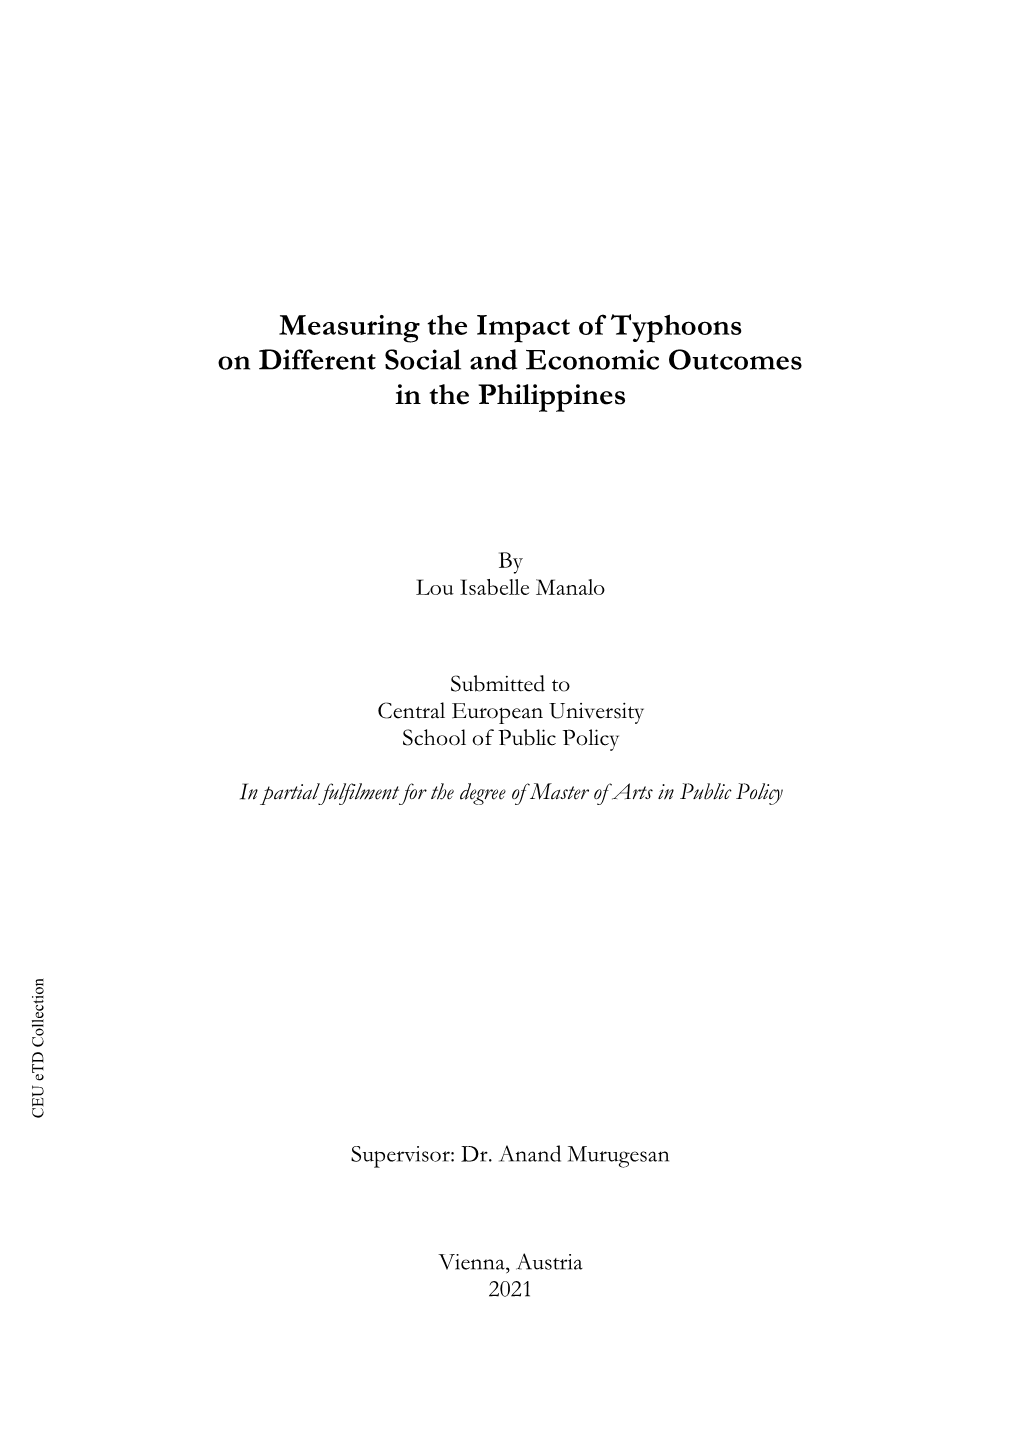 Measuring the Impact of Typhoons on Different Social and Economic Outcomes in the Philippines